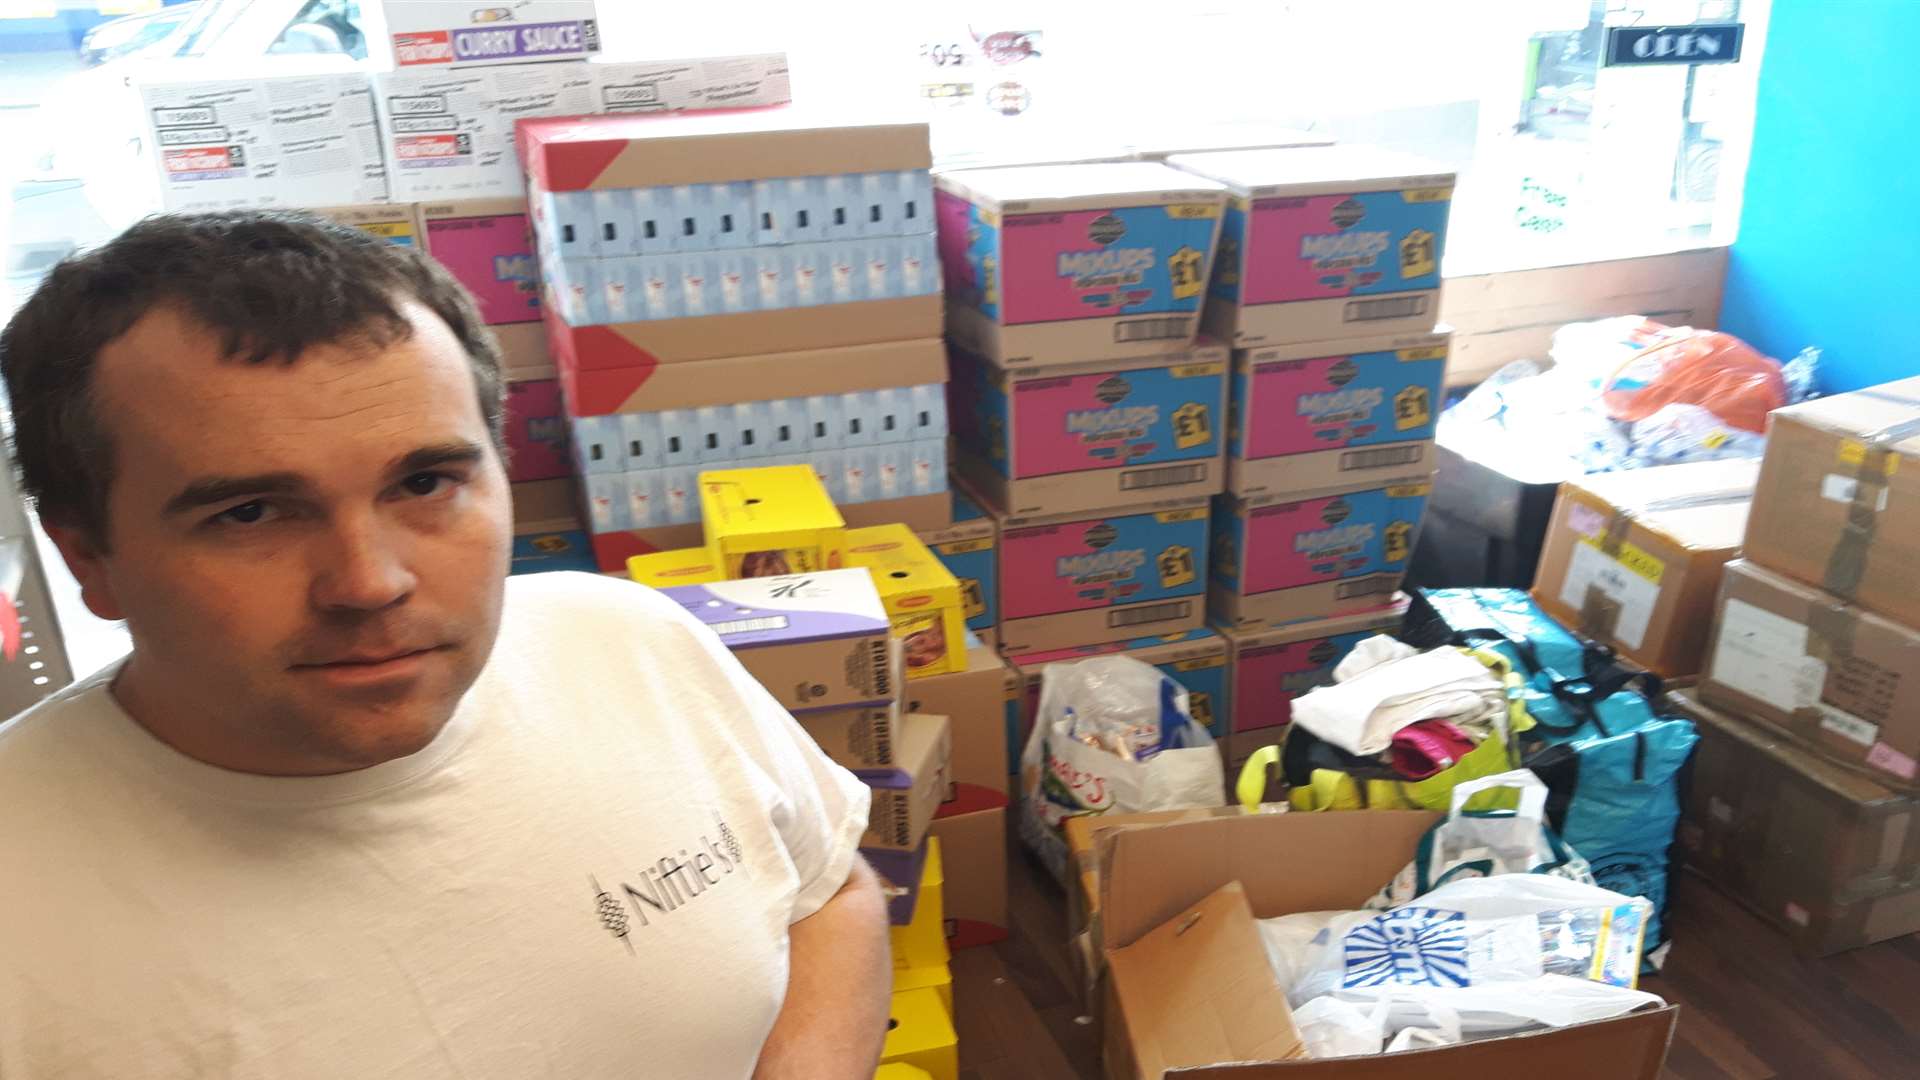 Nathaniel Richards with some of the supplies for survivors of the Grenfell disaster